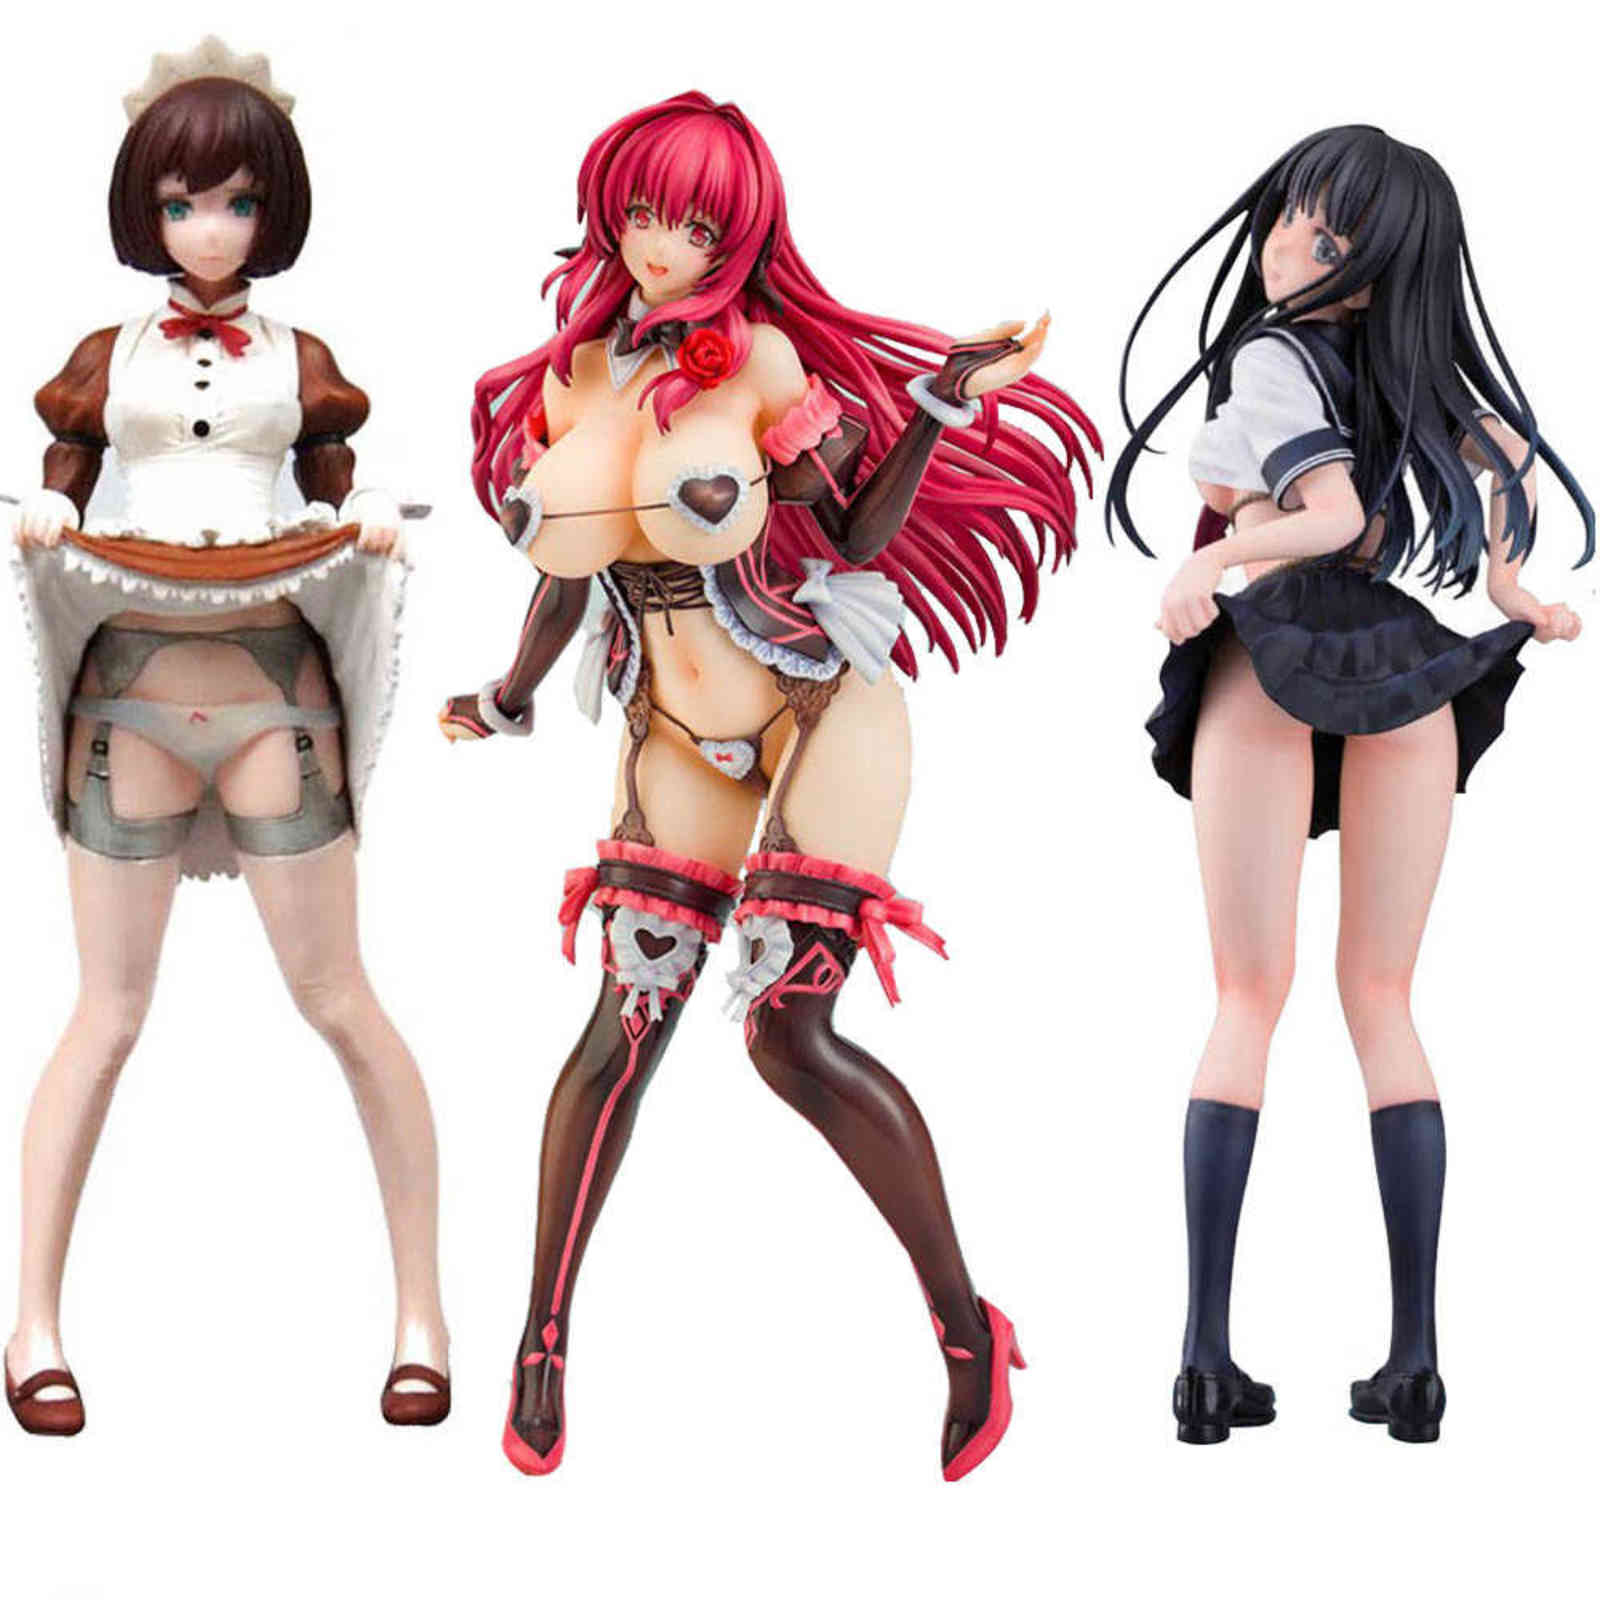 

Daiki Murakami Suigun No Yakata INDEXGIRLS Index PVC Action Figure toy Anime Sexy Girls figures Adult Collection Model Doll Gift H1105, No retail package